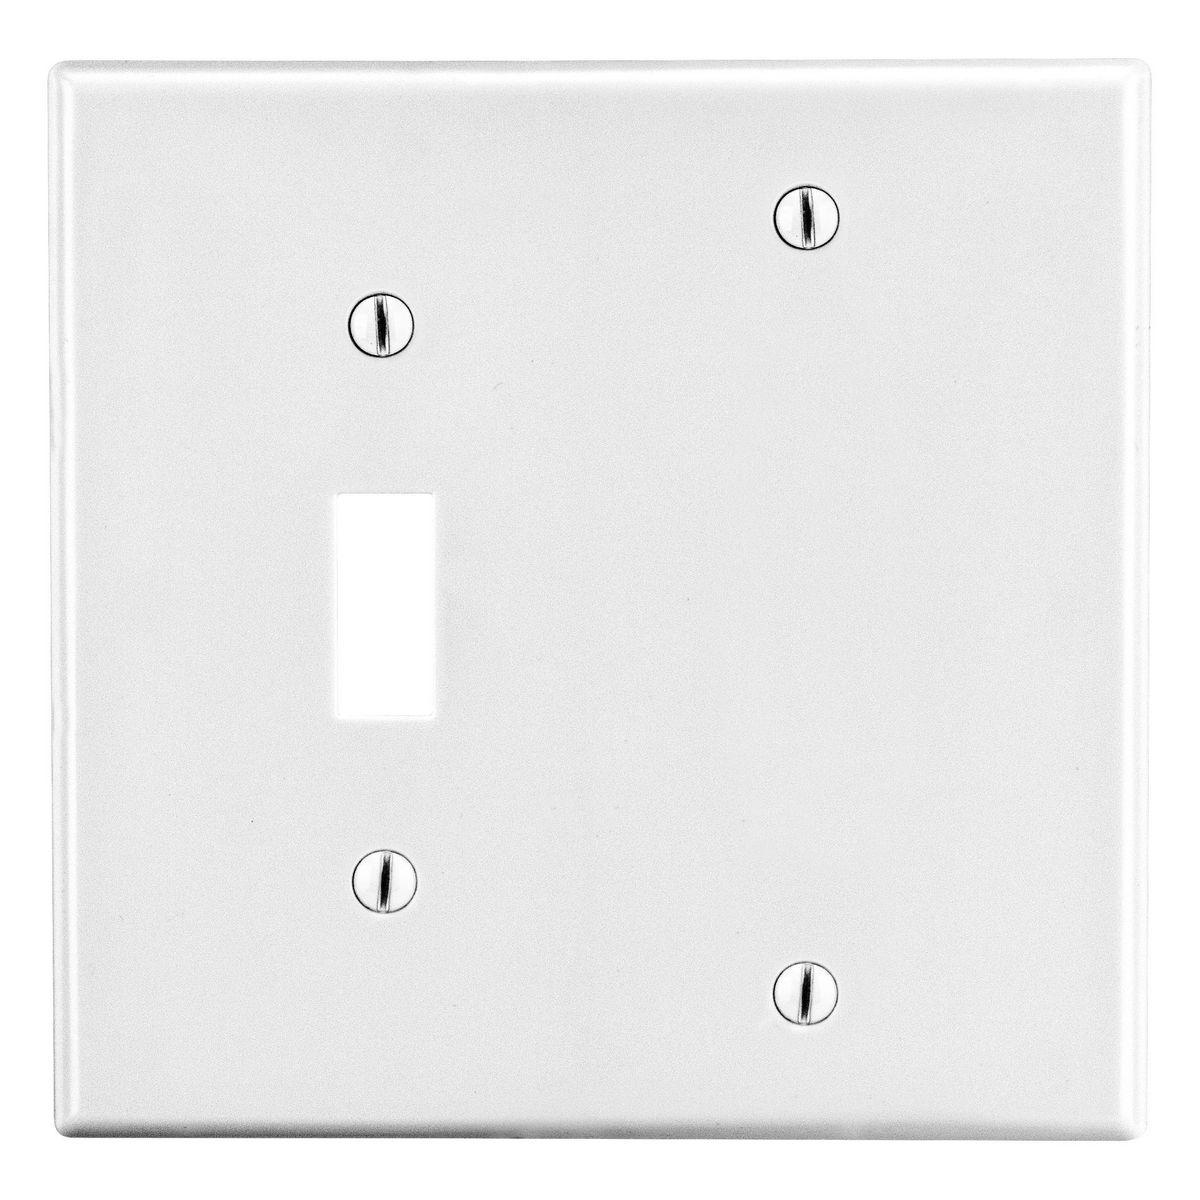 Hubbell PJ113W Wallplate, Mid-Size 2-Gang, 1) Toggle 1) Box Mount Blank, White  ; High-impact, self-extinguishing polycarbonate material ; More Rigid ; Sharp lines and less dimpling ; Smooth satin finish ; Blends into wall with an optimum finish ; Smooth Satin Finish